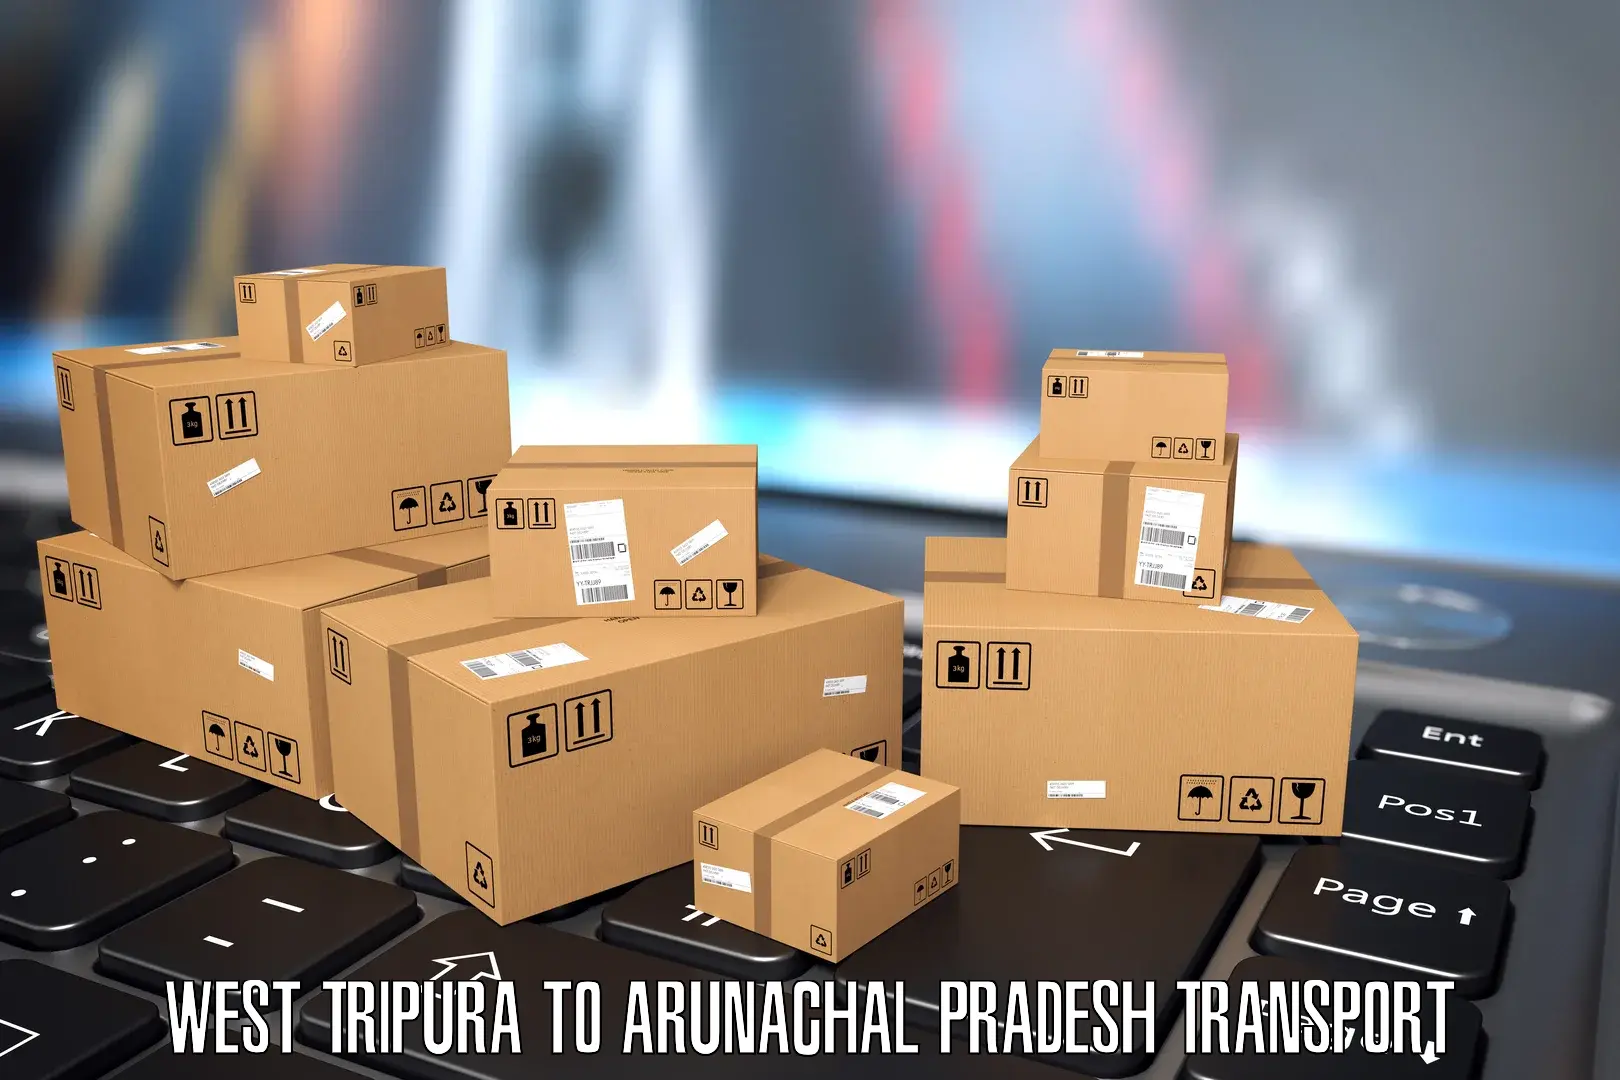 Furniture transport service West Tripura to Aalo